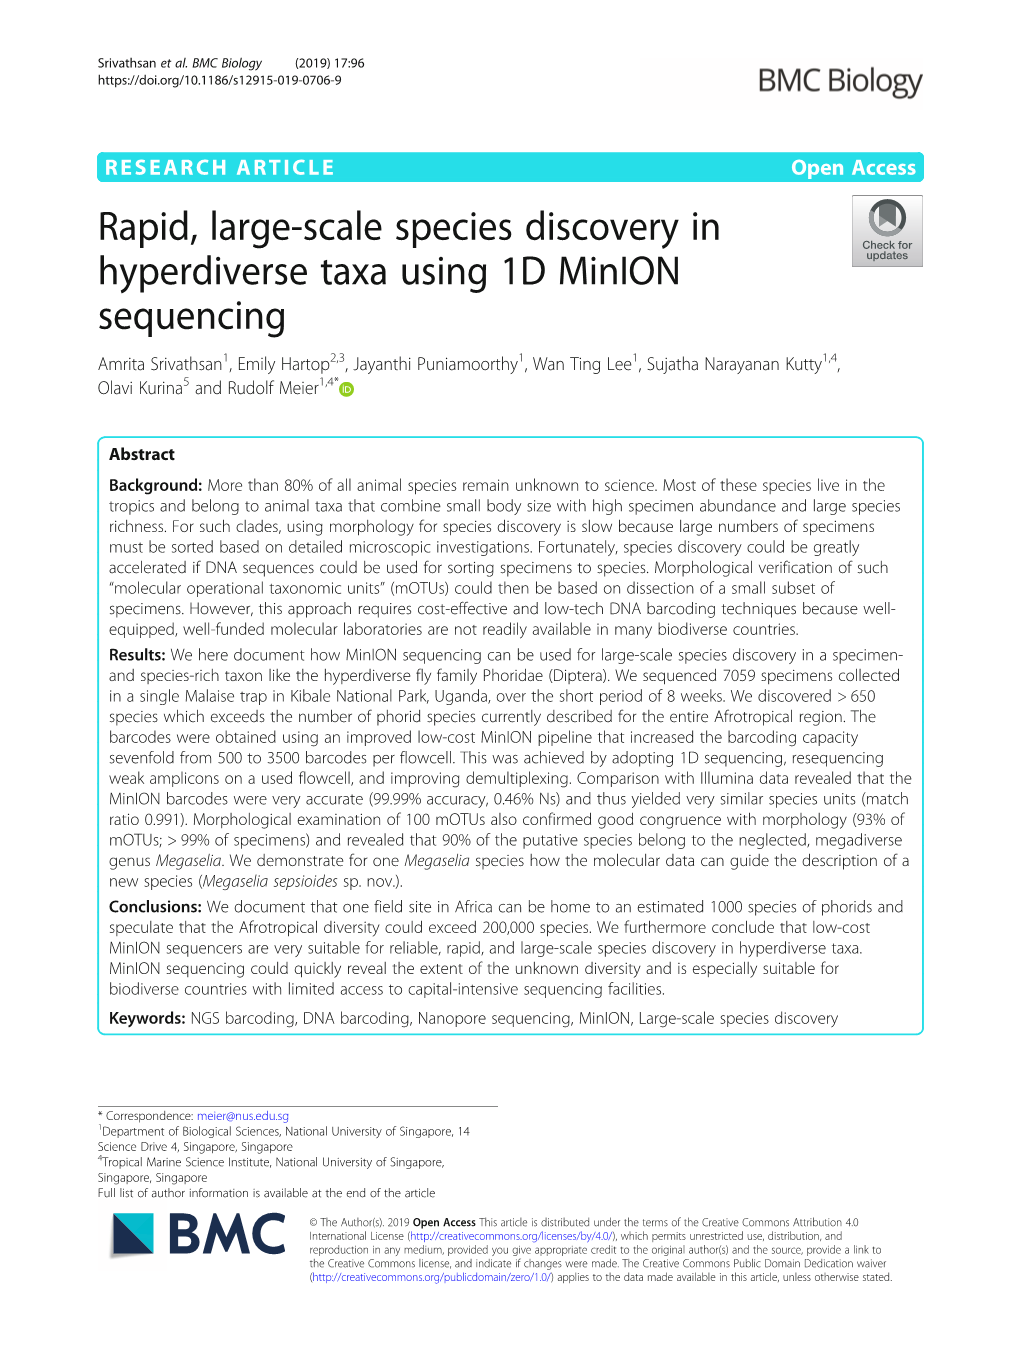 Rapid, Large-Scale Species Discovery in Hyperdiverse Taxa Using 1D